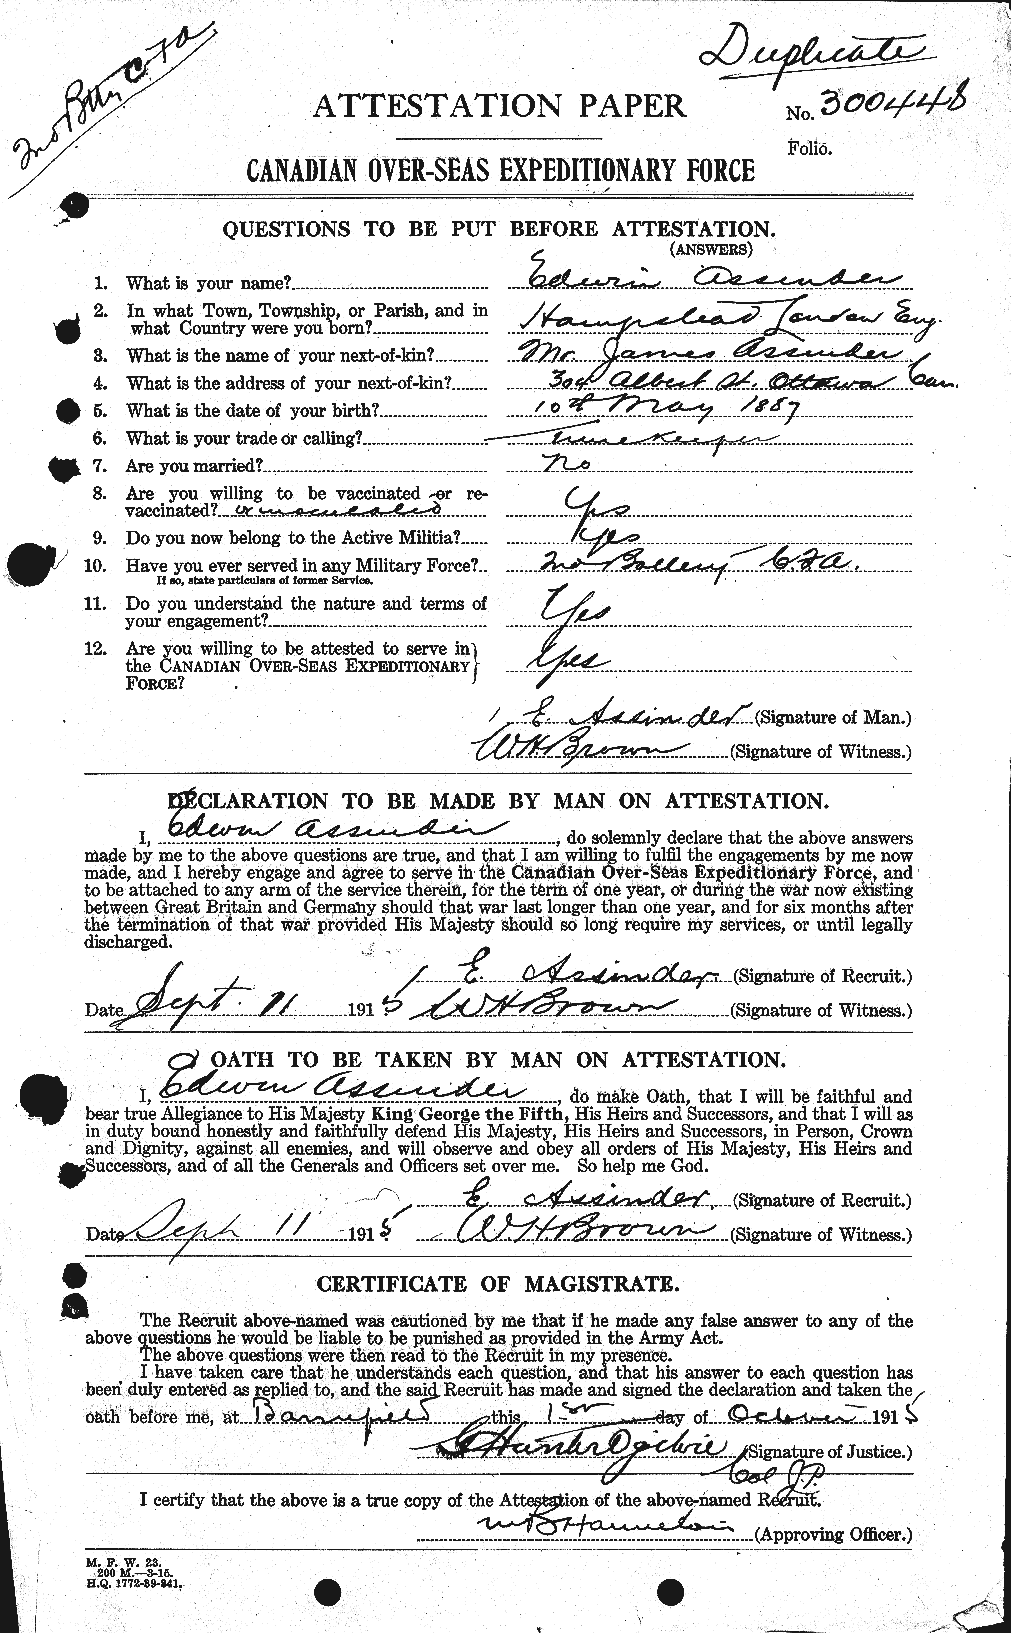 Personnel Records of the First World War - CEF 217175a